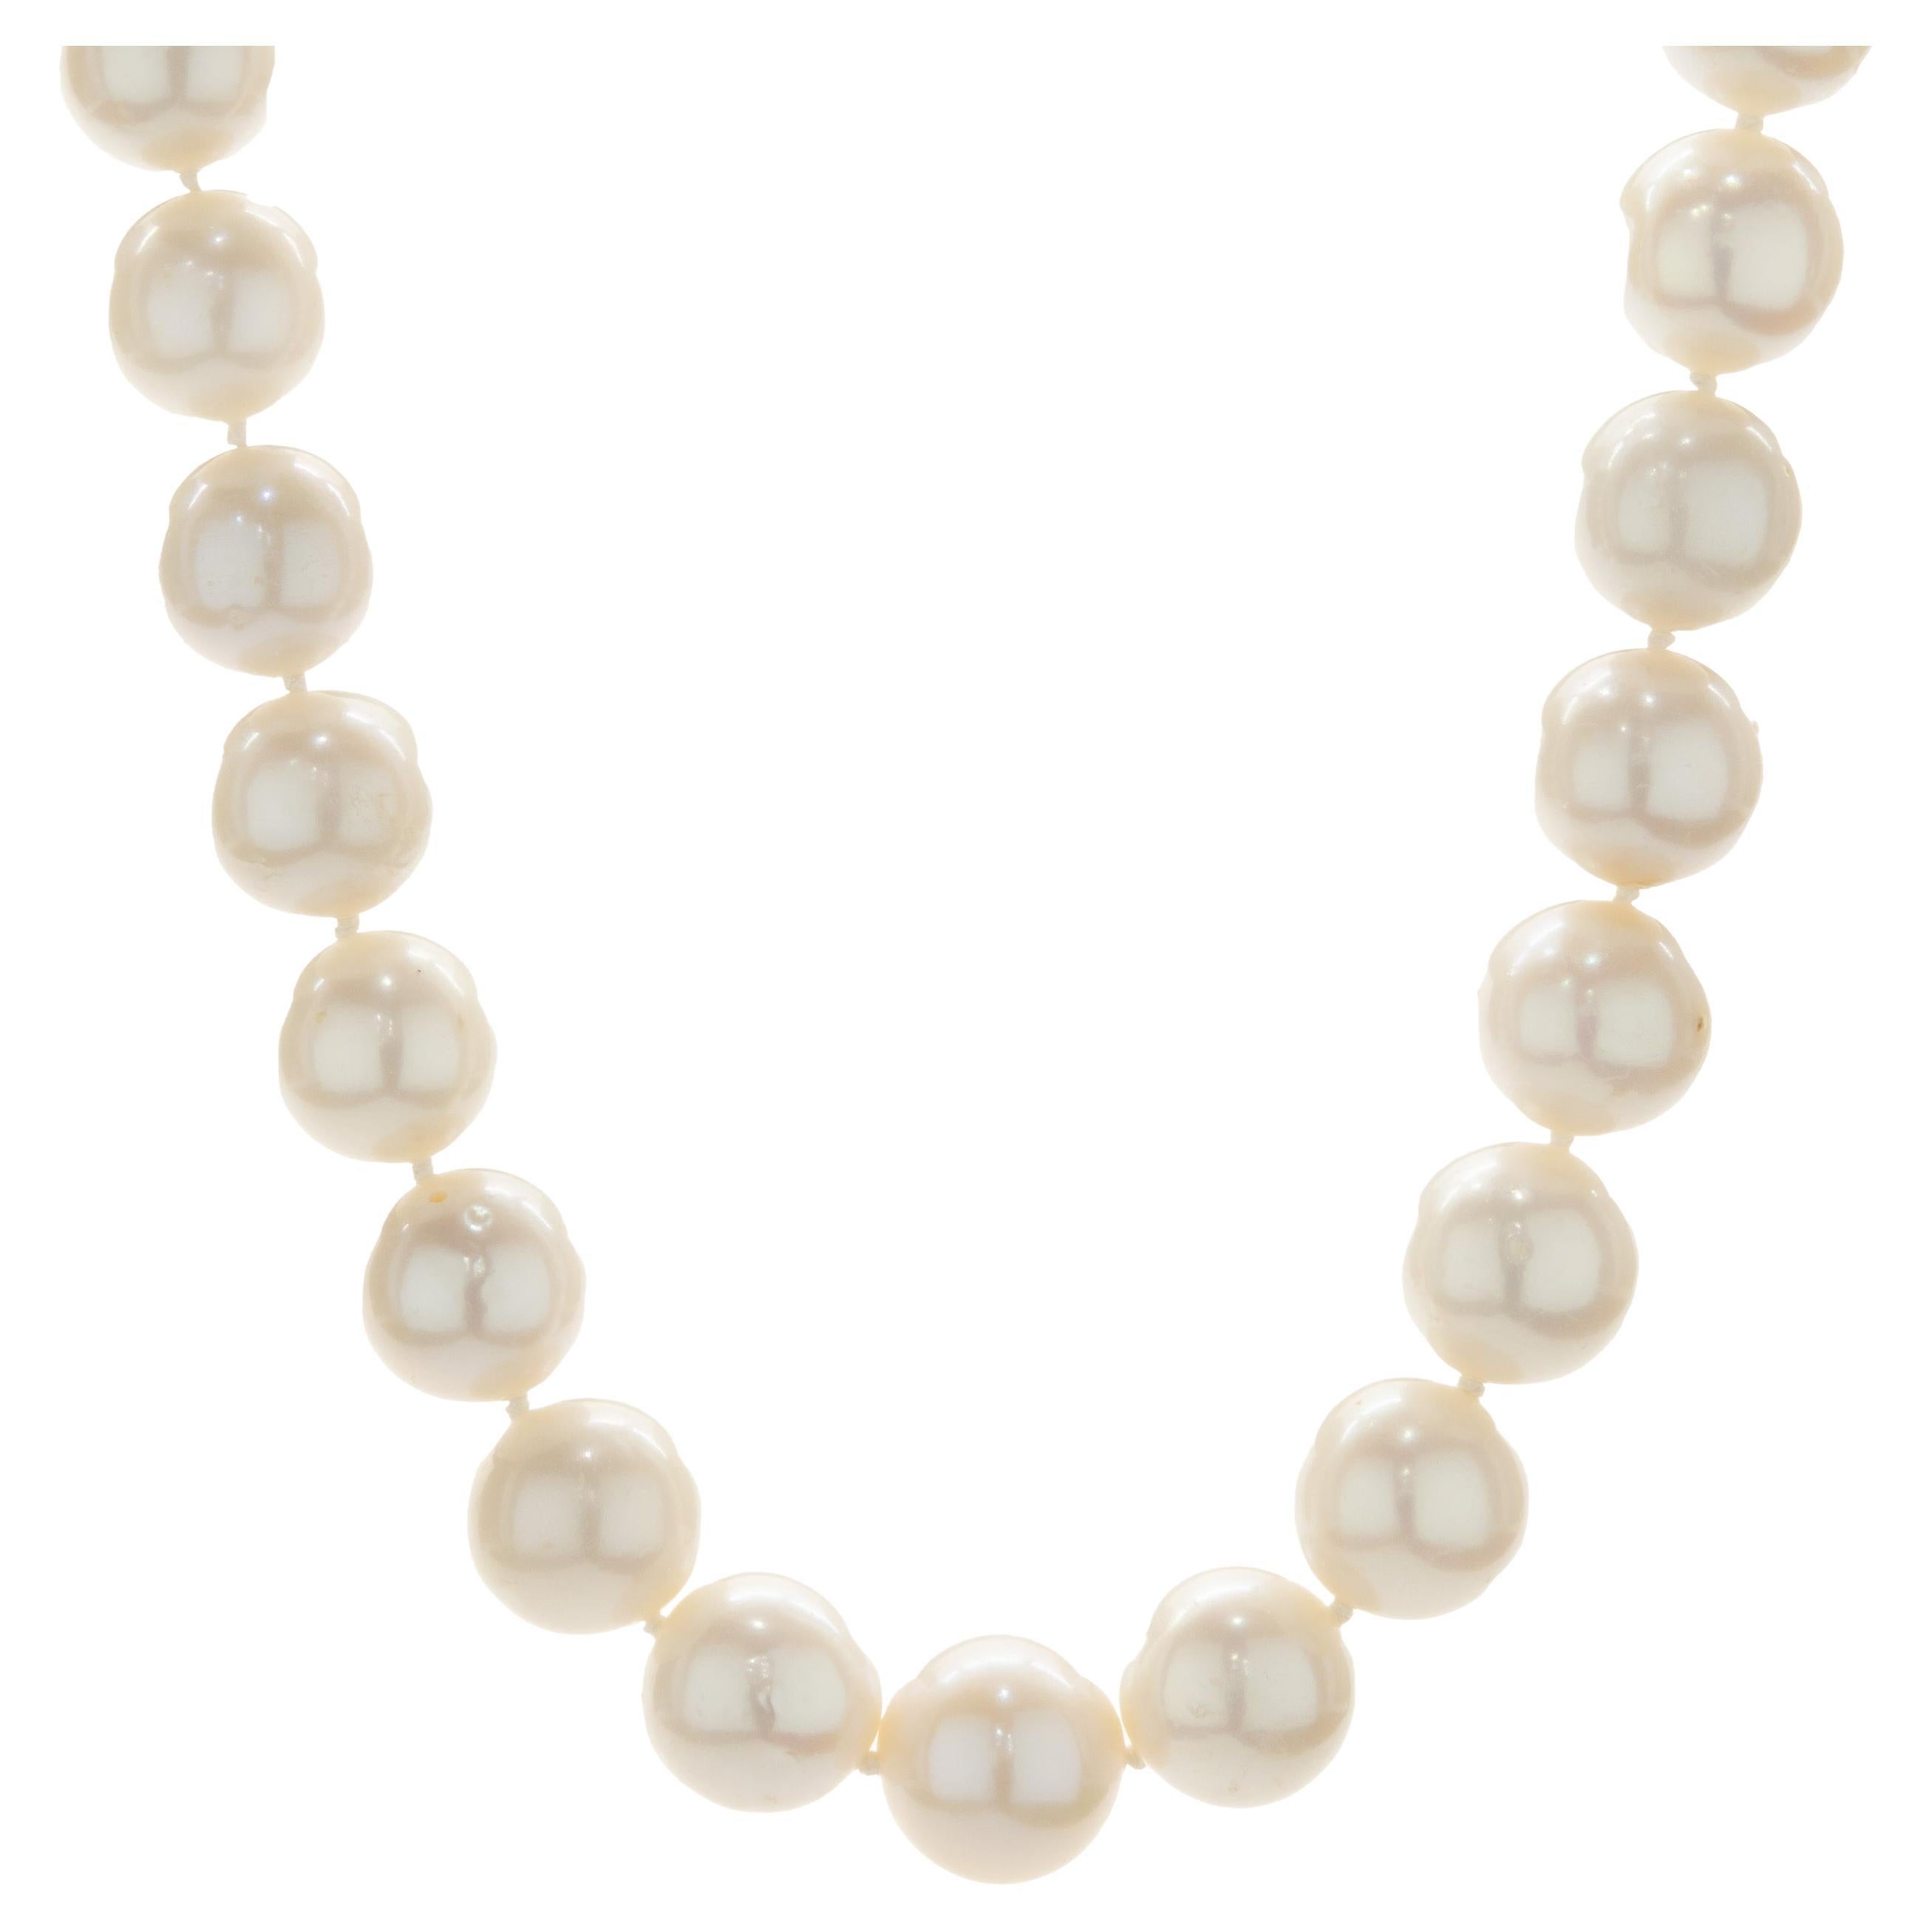 Ivory Freshwater Pearl Necklace